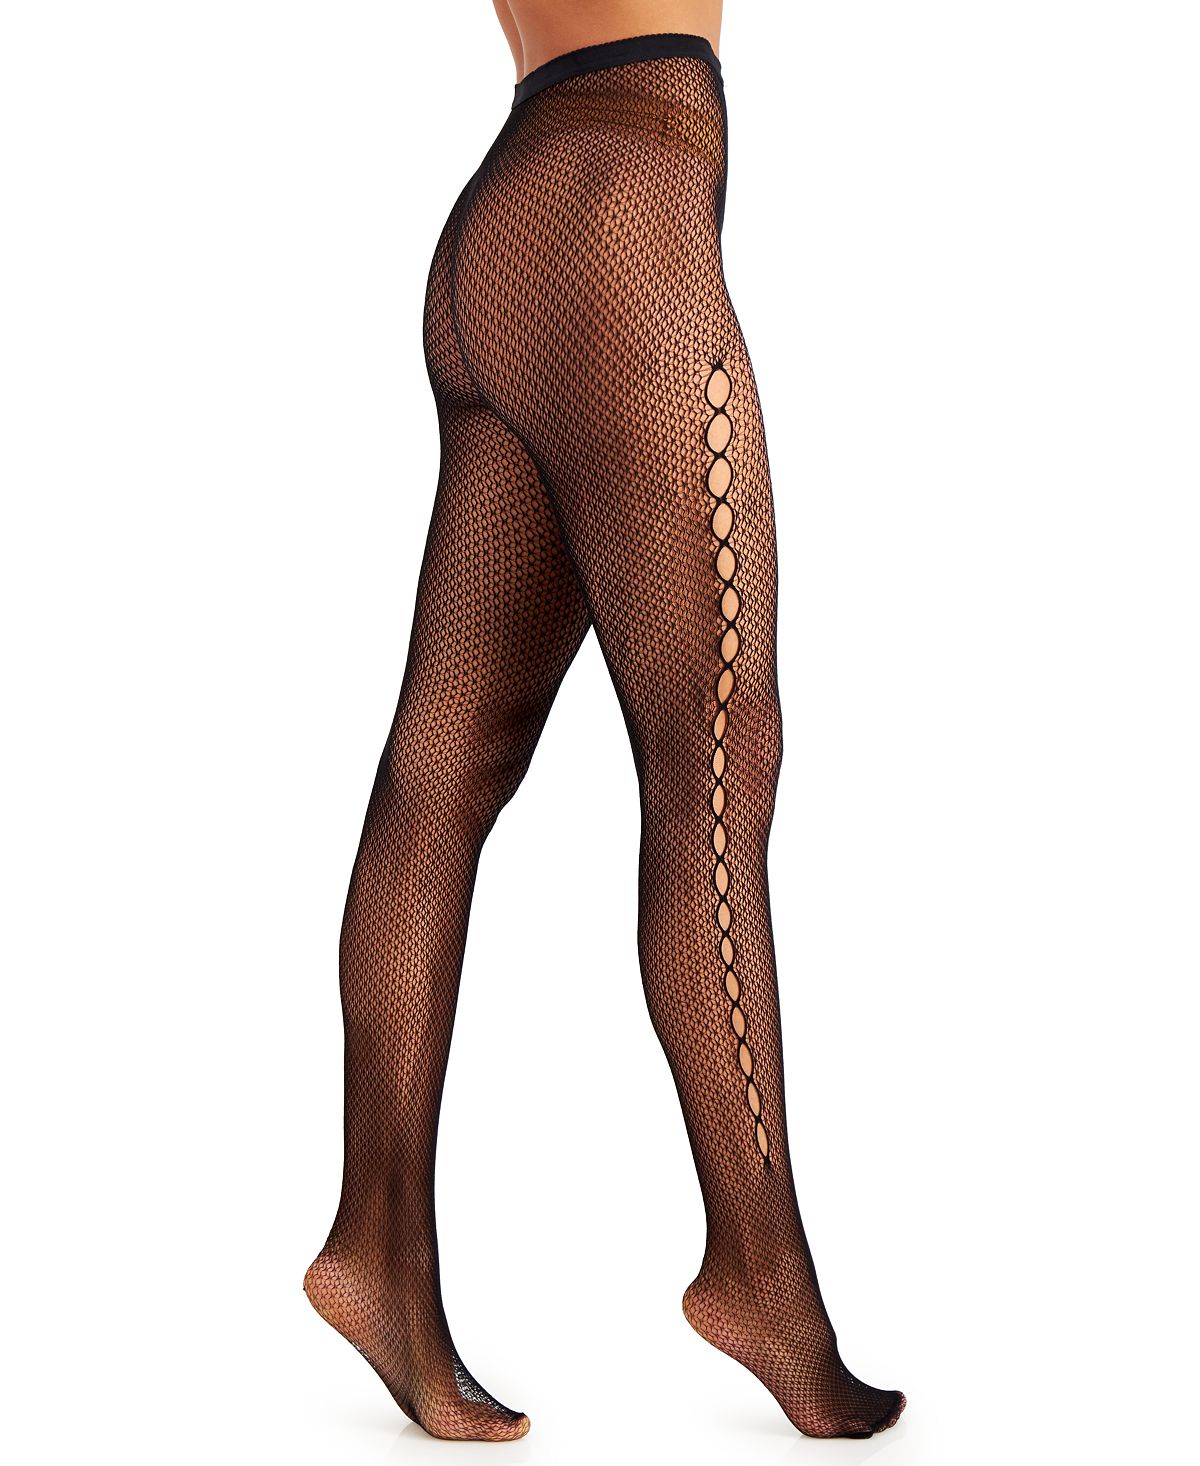 Inc International Concepts Cut Out Fishnet Tights Black